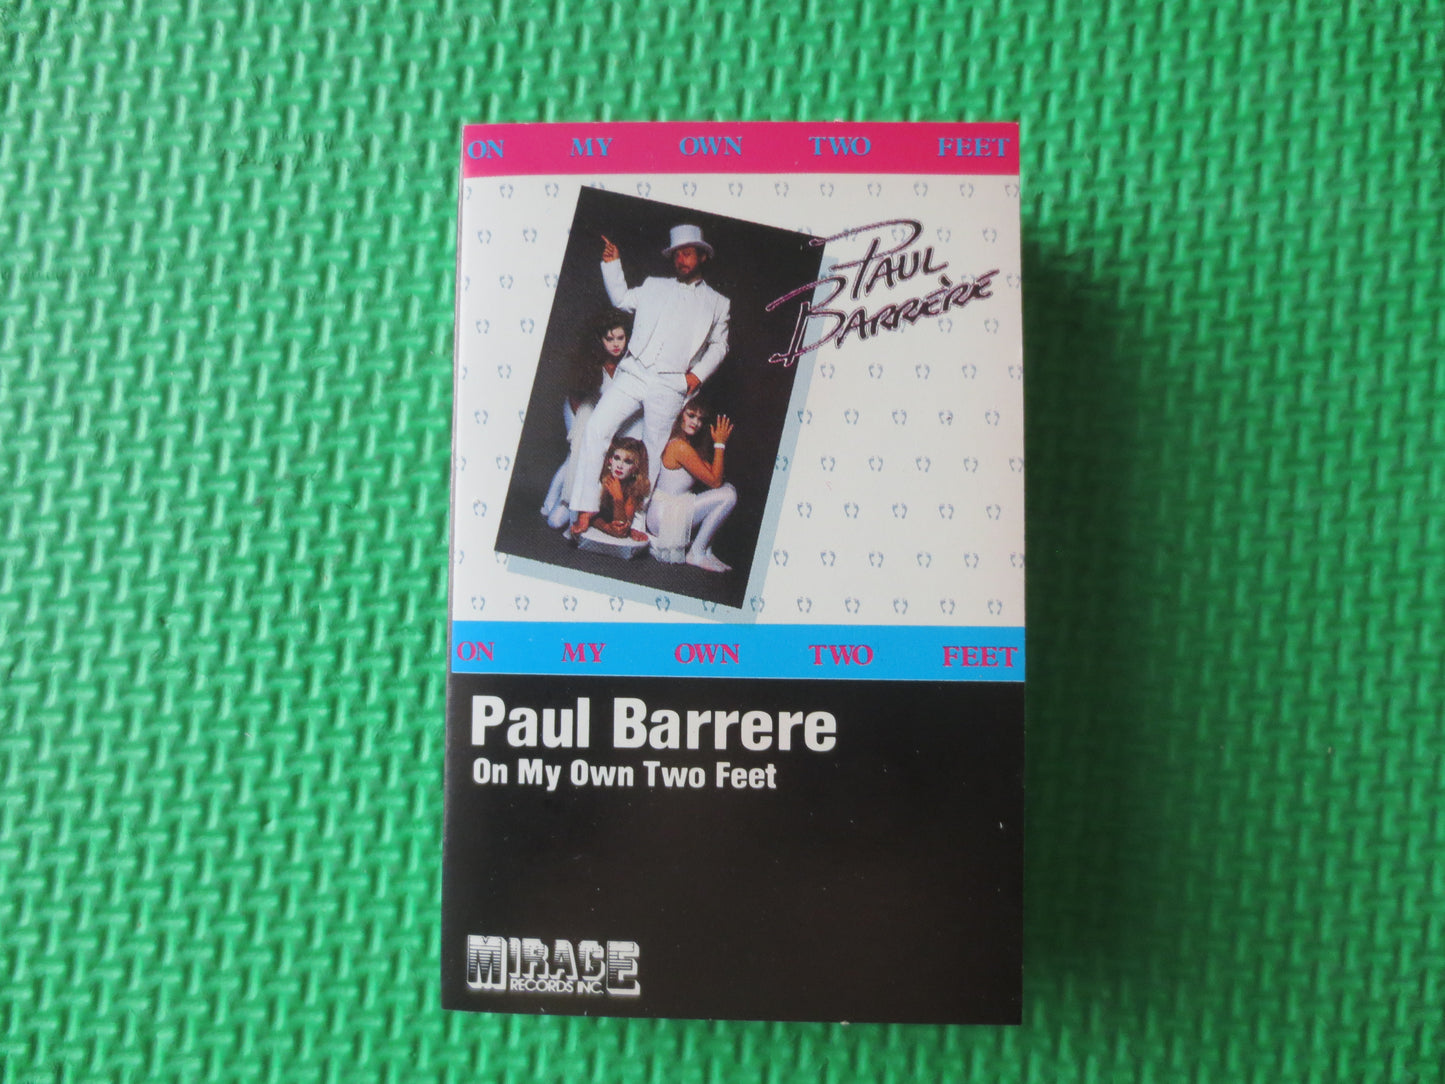 PAUL BARRERE, On My OWN Two Feet, Tapes, Tape Cassette, Rock Music Tapes, Music Cassettes, Cassette Music, 1983 Cassette